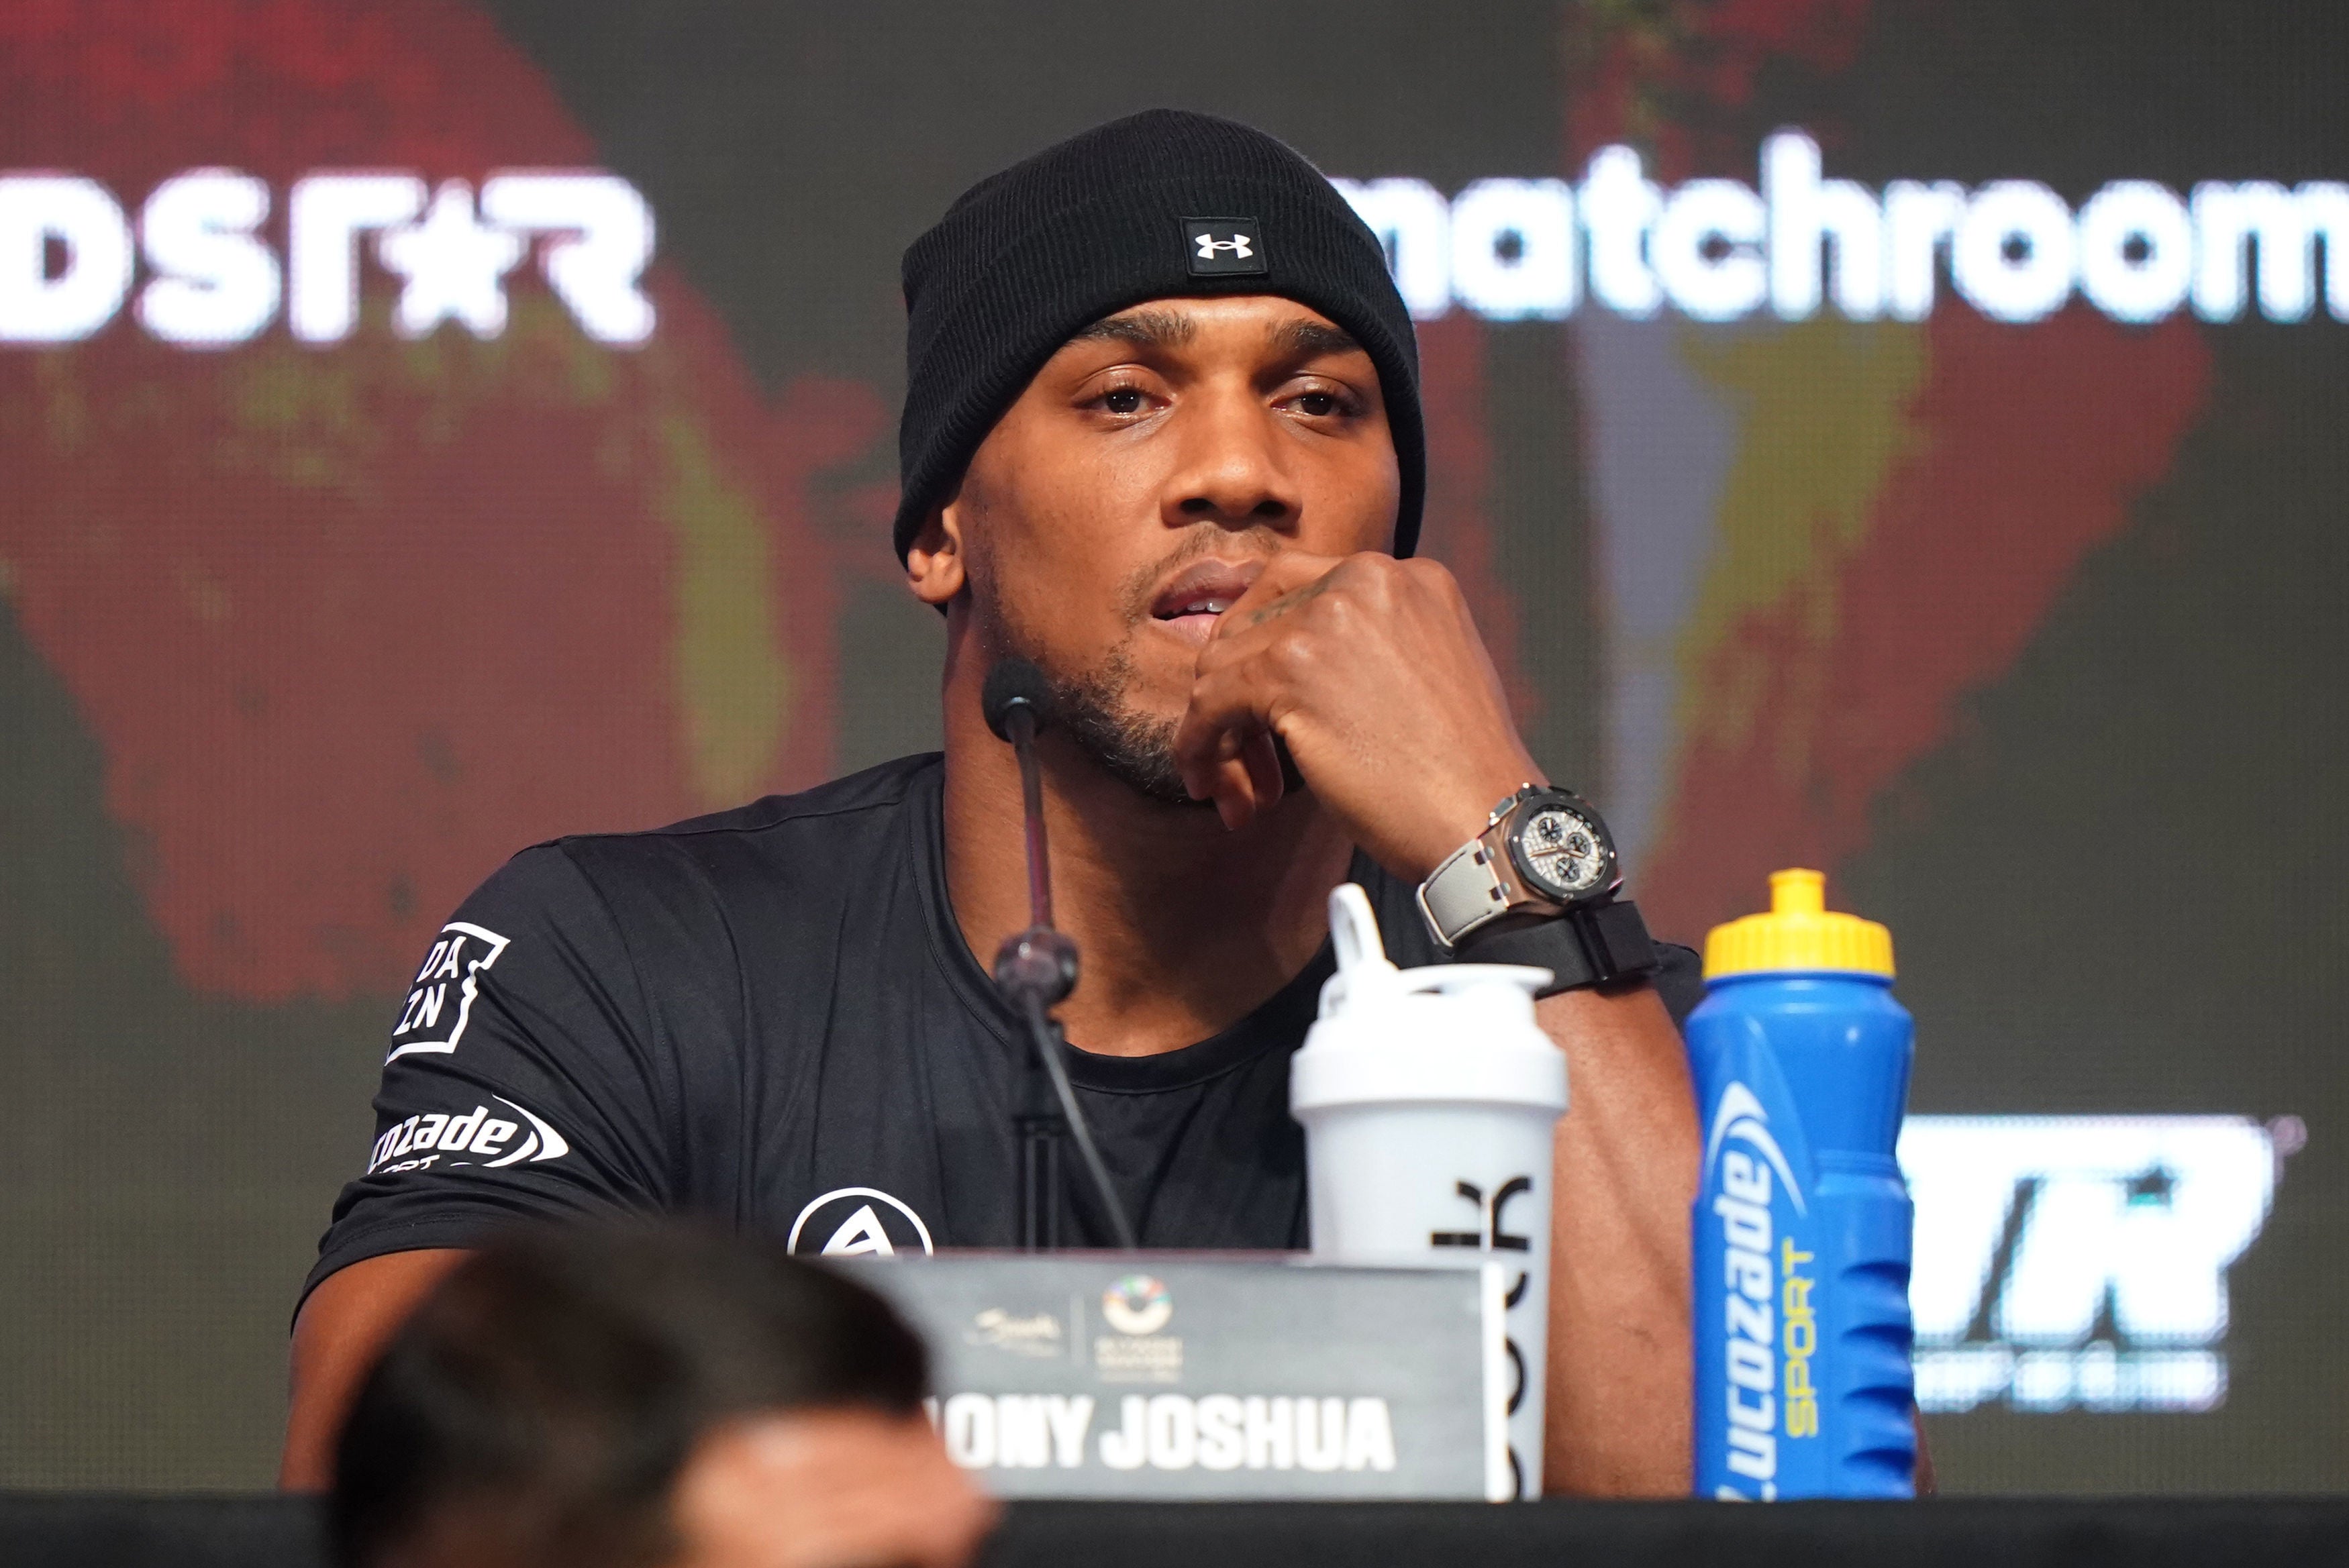 Joshua hit out at Jarrell Miller and host Dev Sahni while on stage